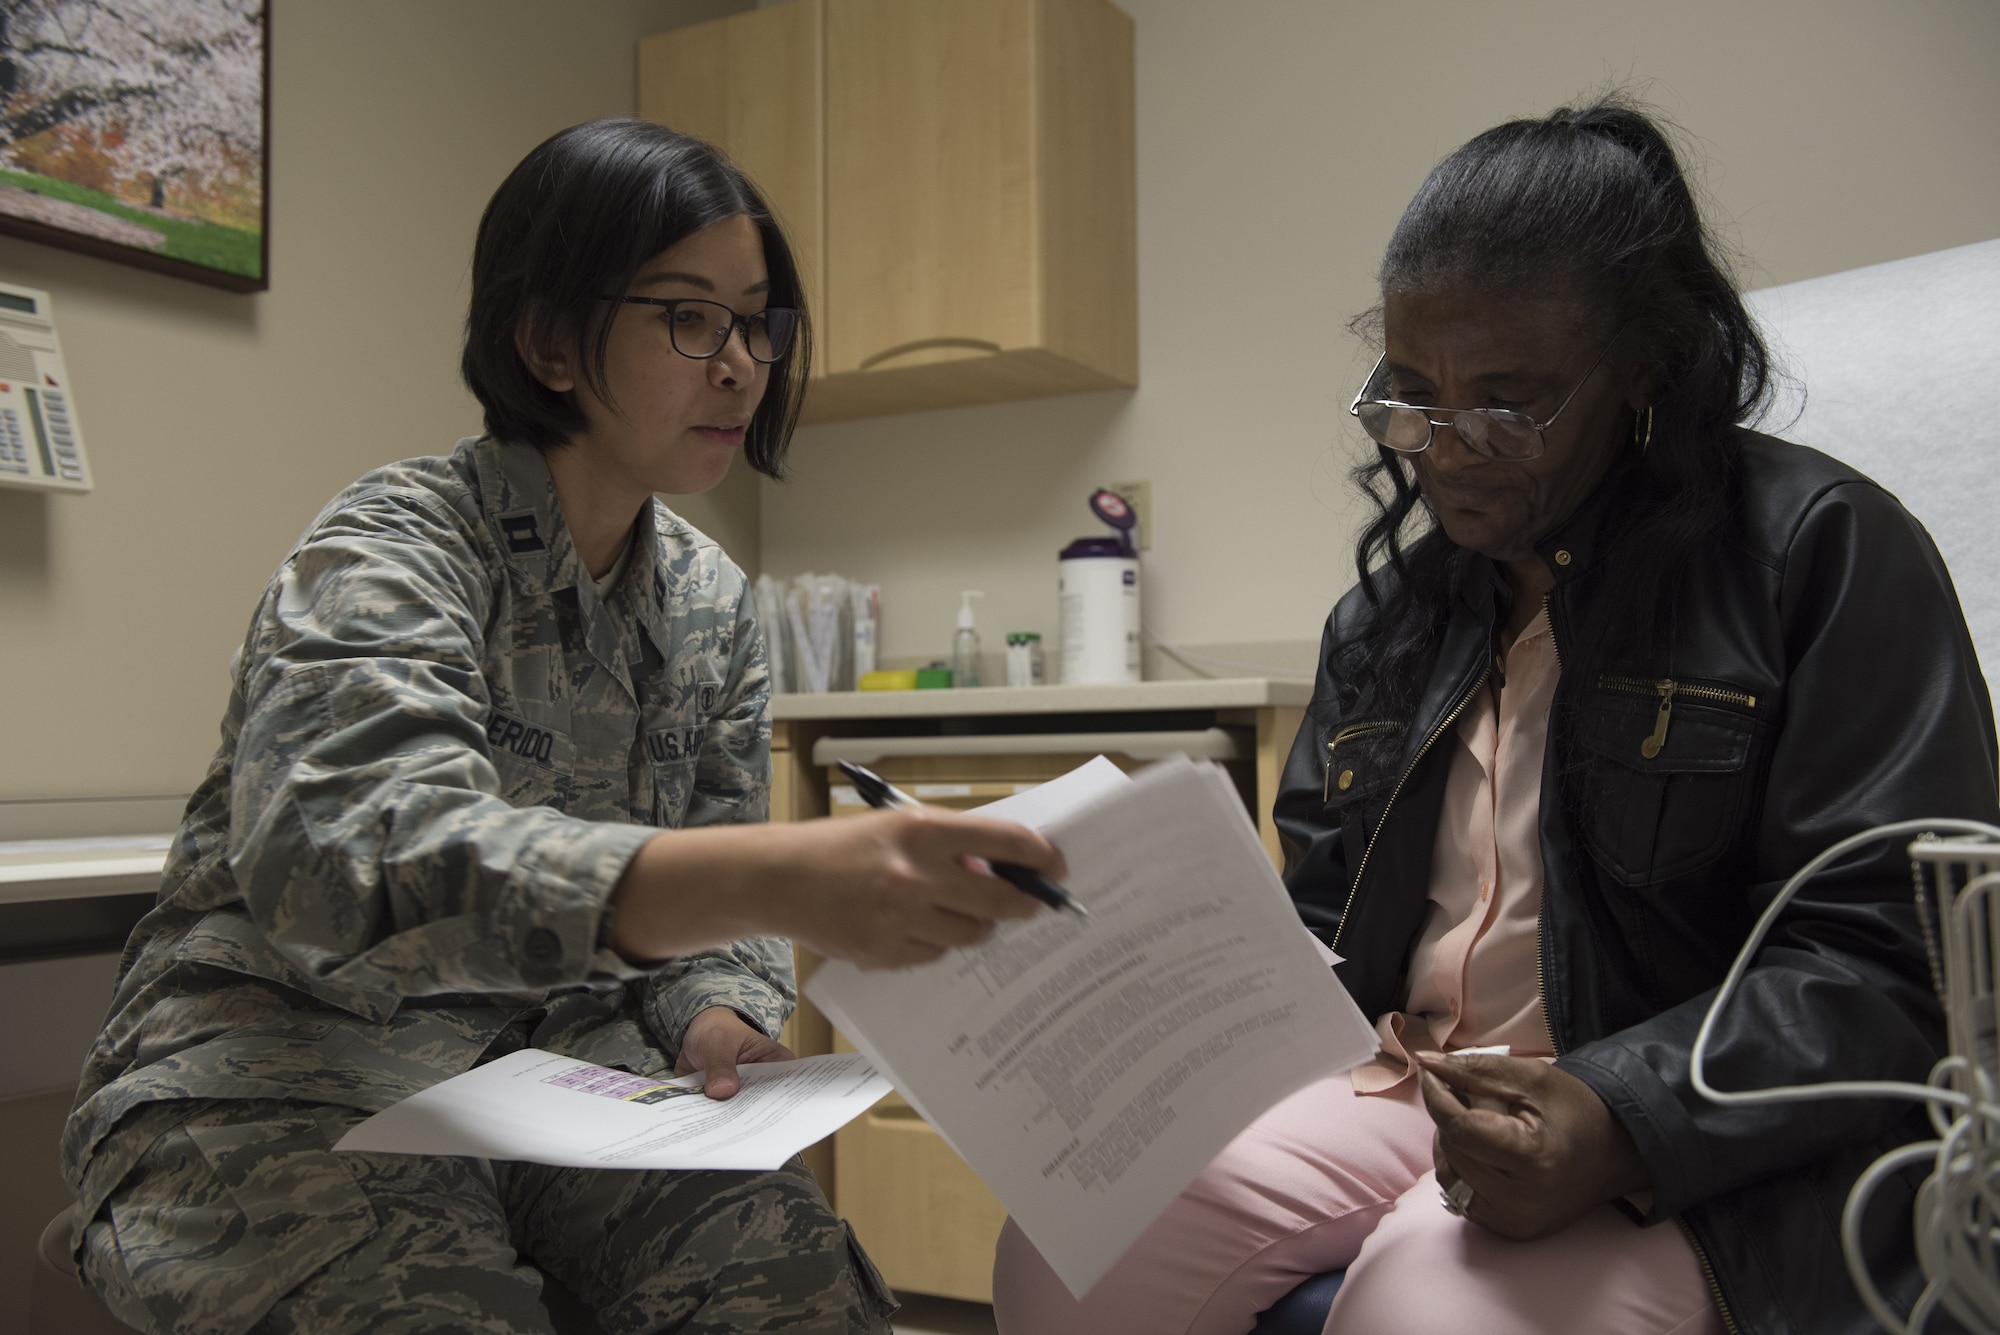 Capt. Janice Perido, 60th Medical Group Surgical Squadron bariatric surgery physician assistant, explains the six month follow up report to Sharon L. Burton, bariatric patient Jan. 25, 2018, at a bariatric surgery waiting room at David Grant USAF Medical Center at Travis Air Force Base, California. Burton had a gastro bypass in July of 2017, and has currently lost 68 percent of her body mass index. (U.S. Air Force photo by Airman 1st Class Jonathon D. A. Carnell)